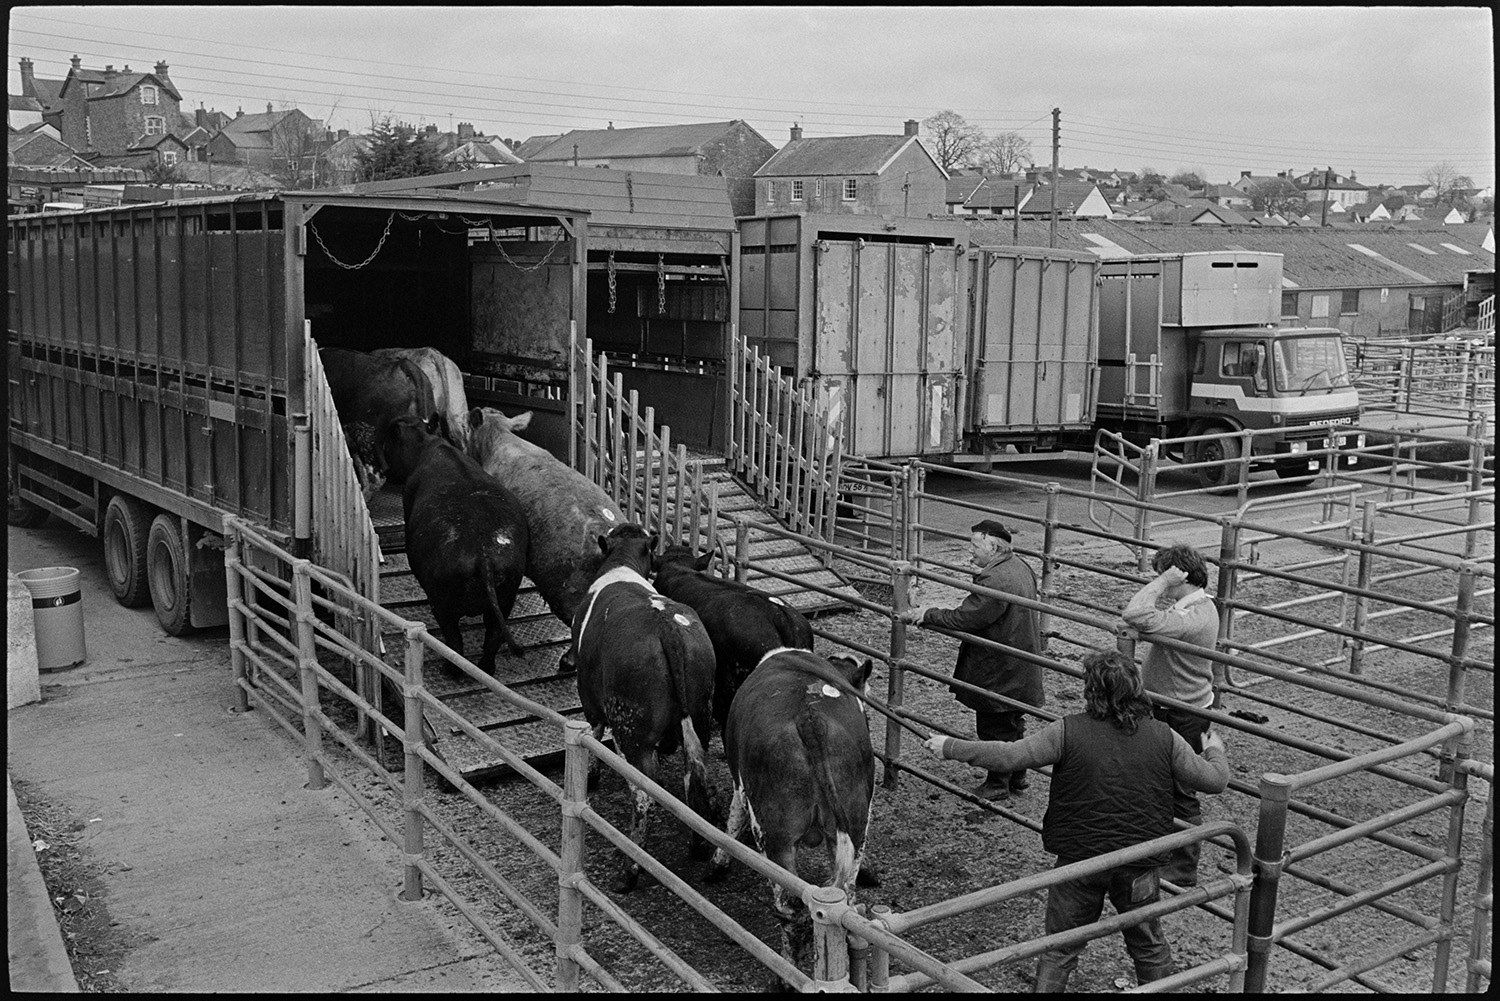 Sheep being loaded and unloaded at market. Lorries parked.
[Cattle being loaded into the back of a lorry parked in a row of waiting lorries at South Molton market.]